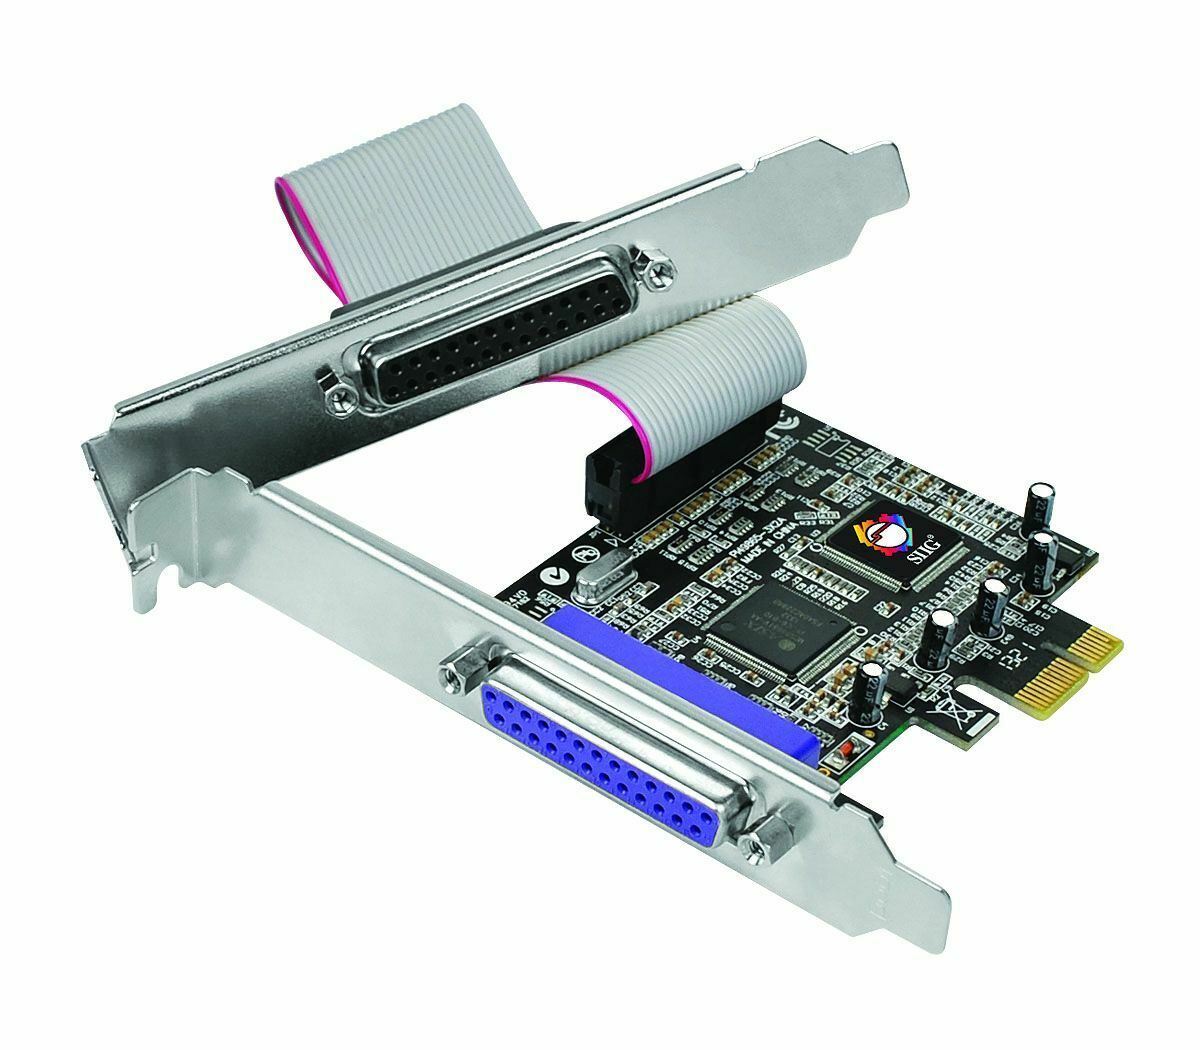 New SIIG DP CyberParallel Dual PCIe Serial Adapter Card - JJ-E02211-S1